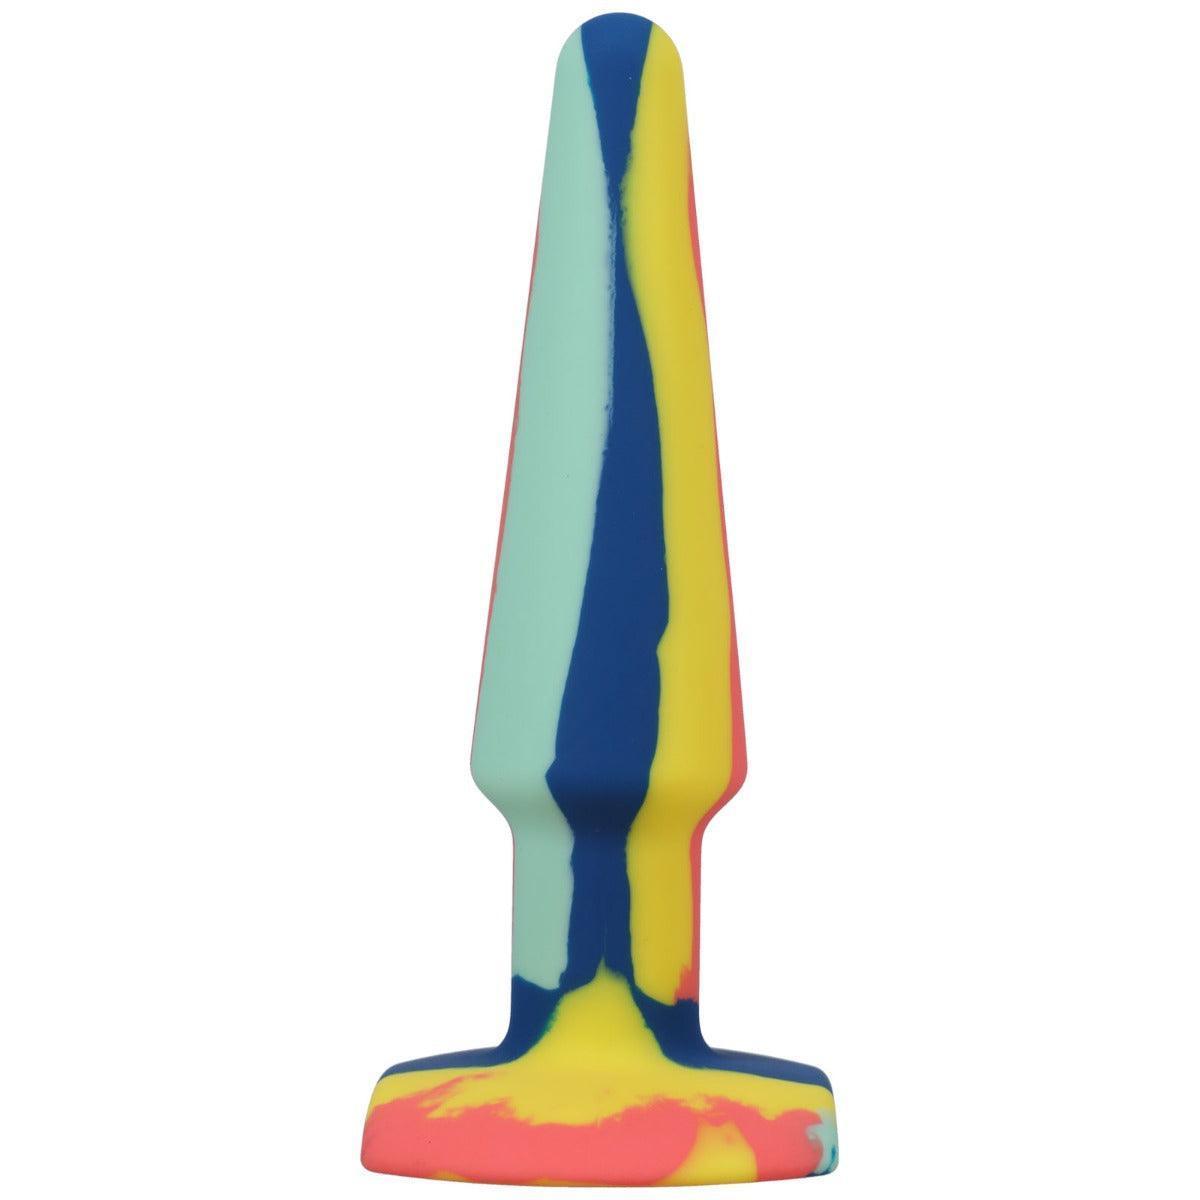 A-Play - Groovy - Silicone Anal Plug - 5 inch Yellow multi-coloured